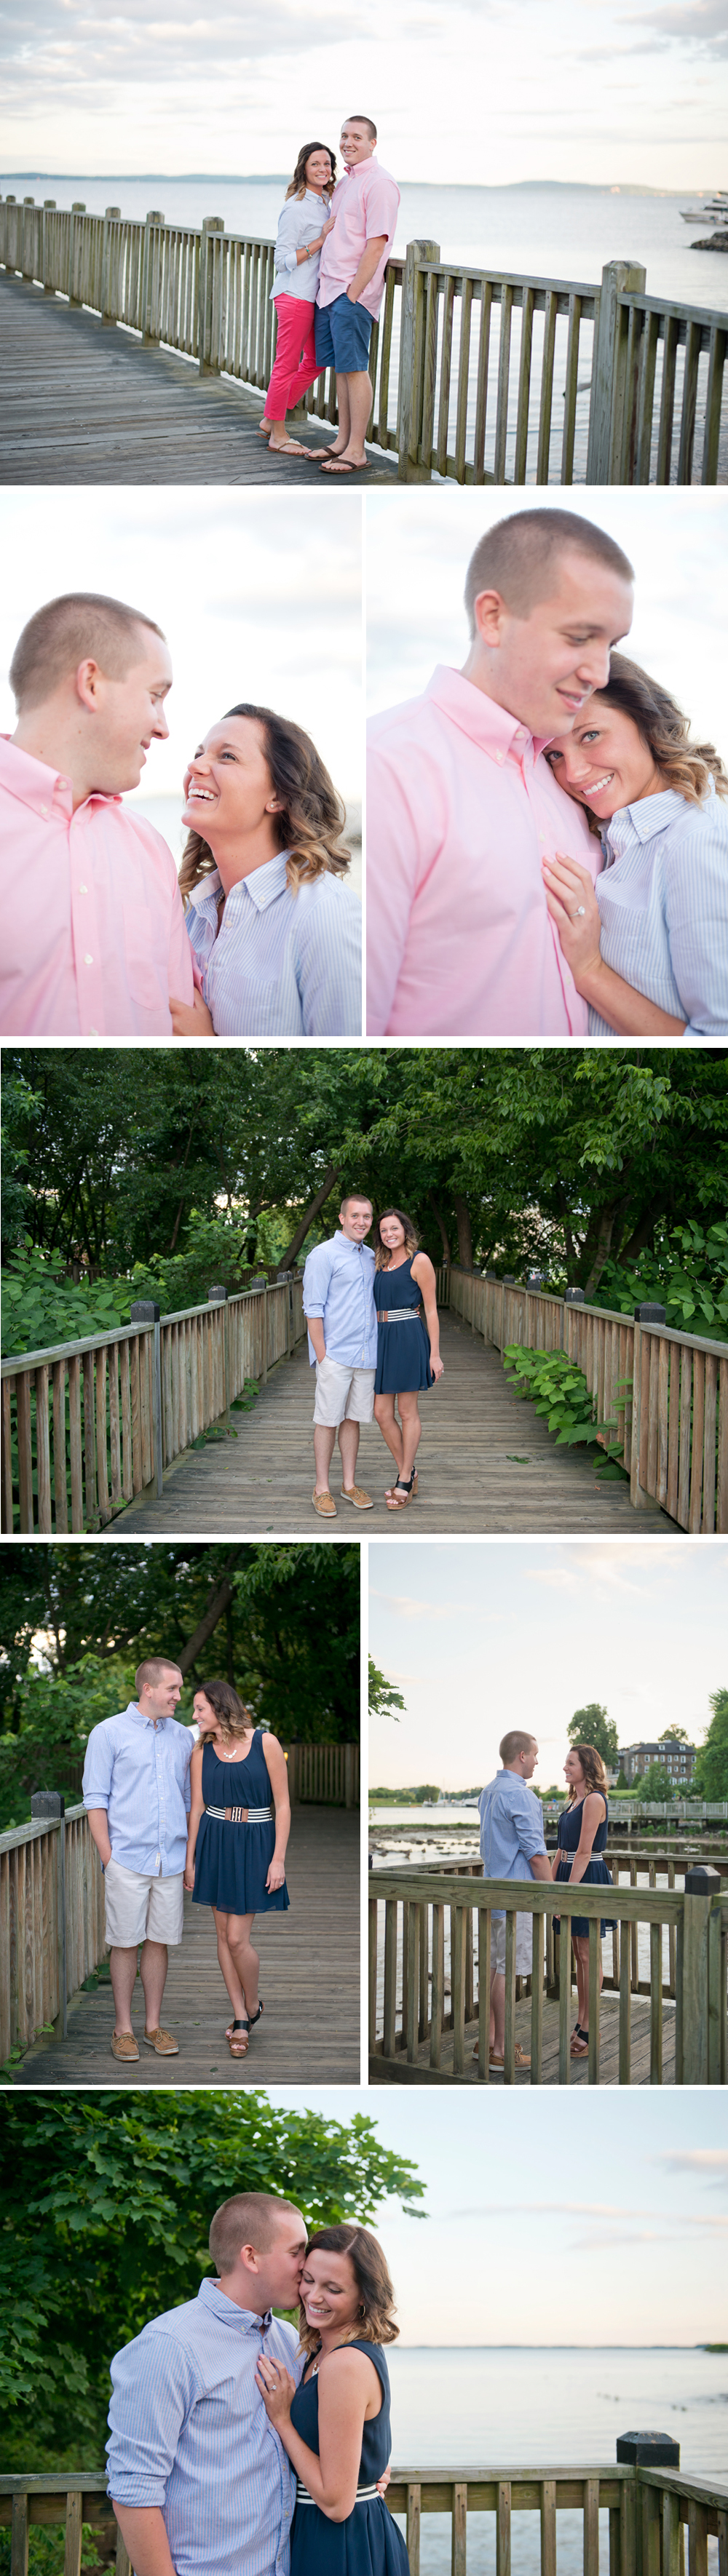 Harford_County_Engagement-10